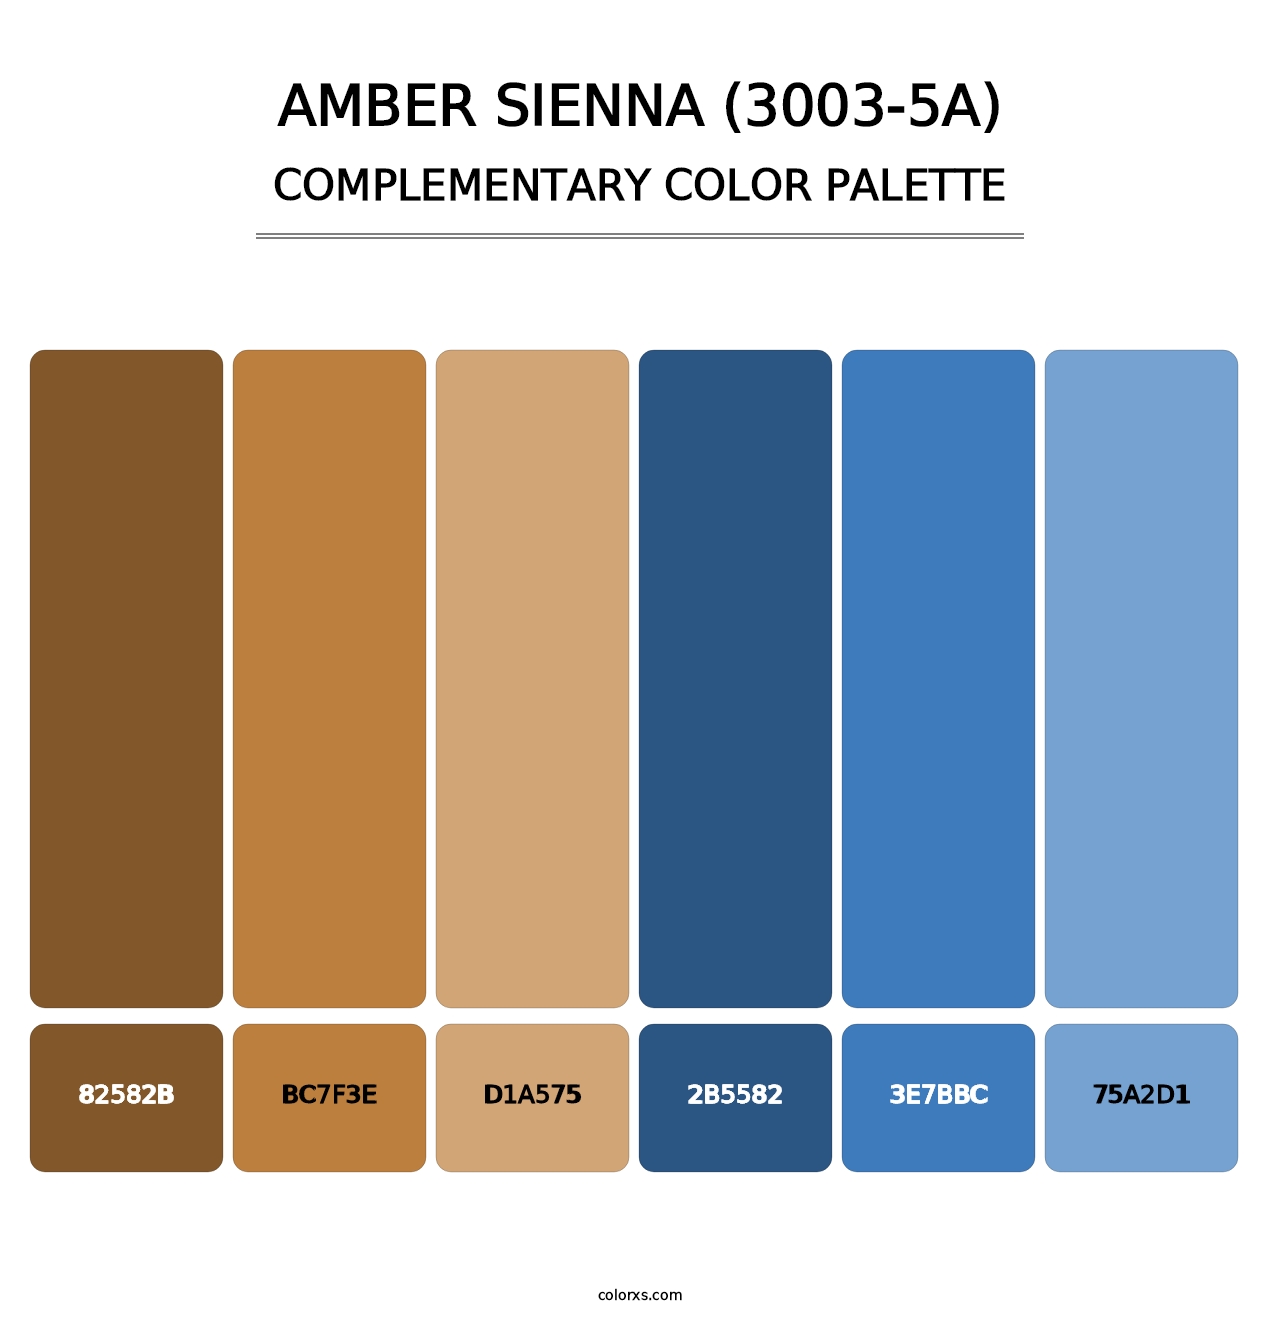 Amber Sienna (3003-5A) - Complementary Color Palette